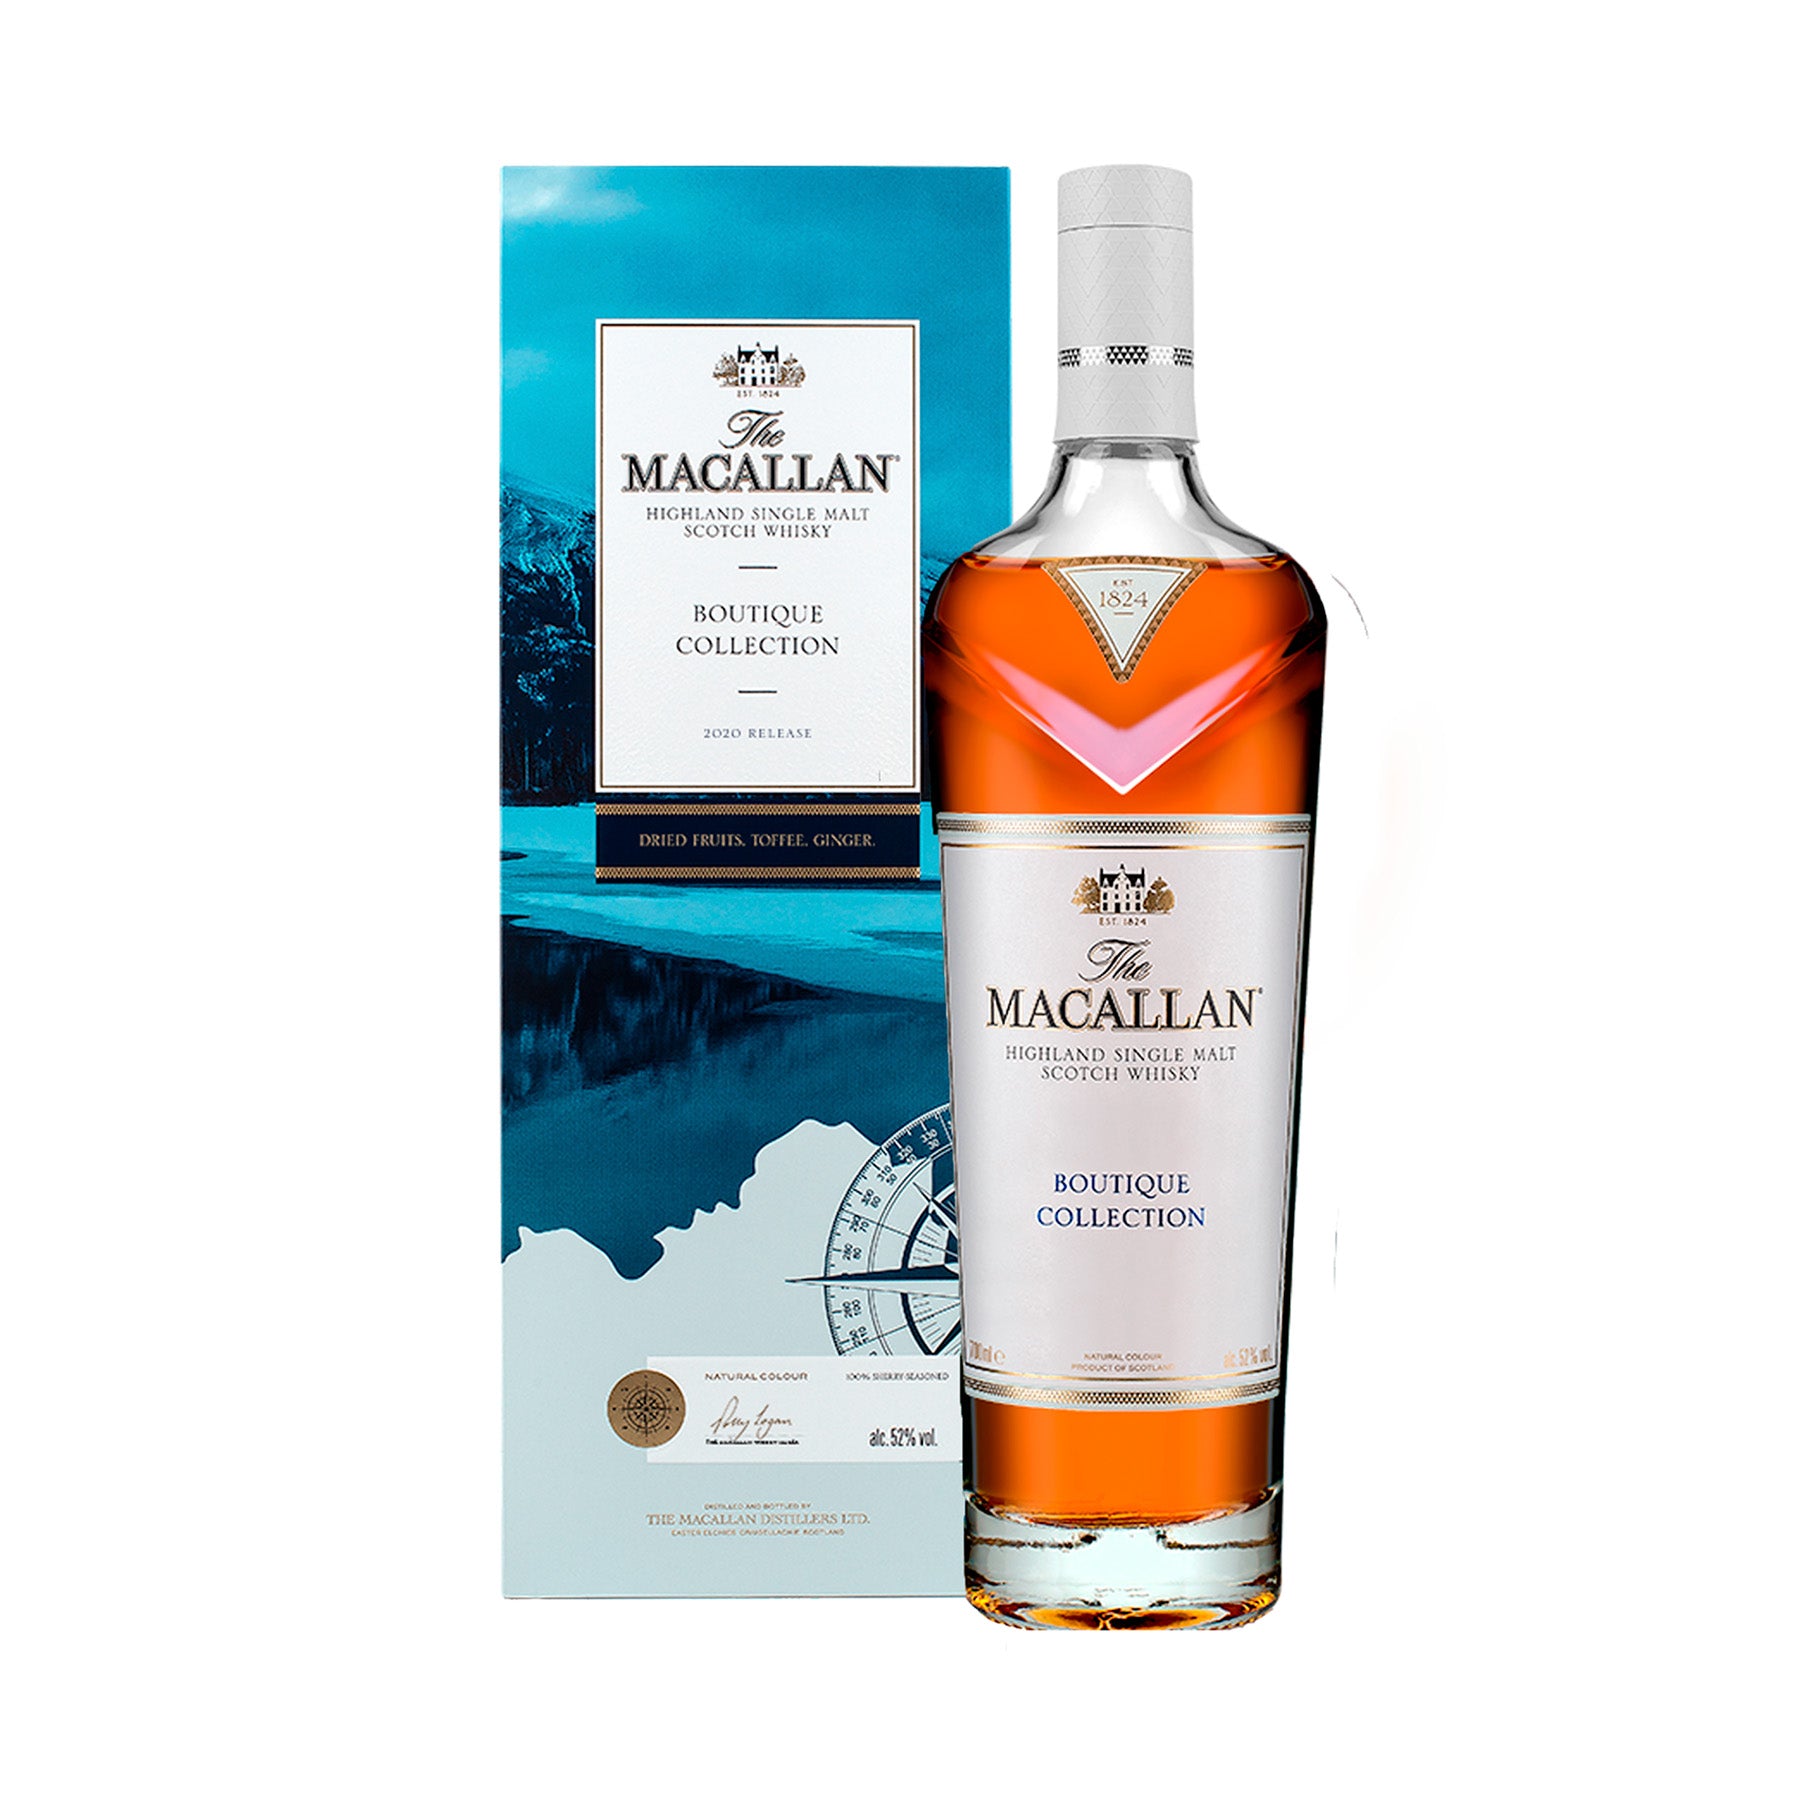 MACALLAN BOUTIQUE COLLECTION 700 MLT 52%